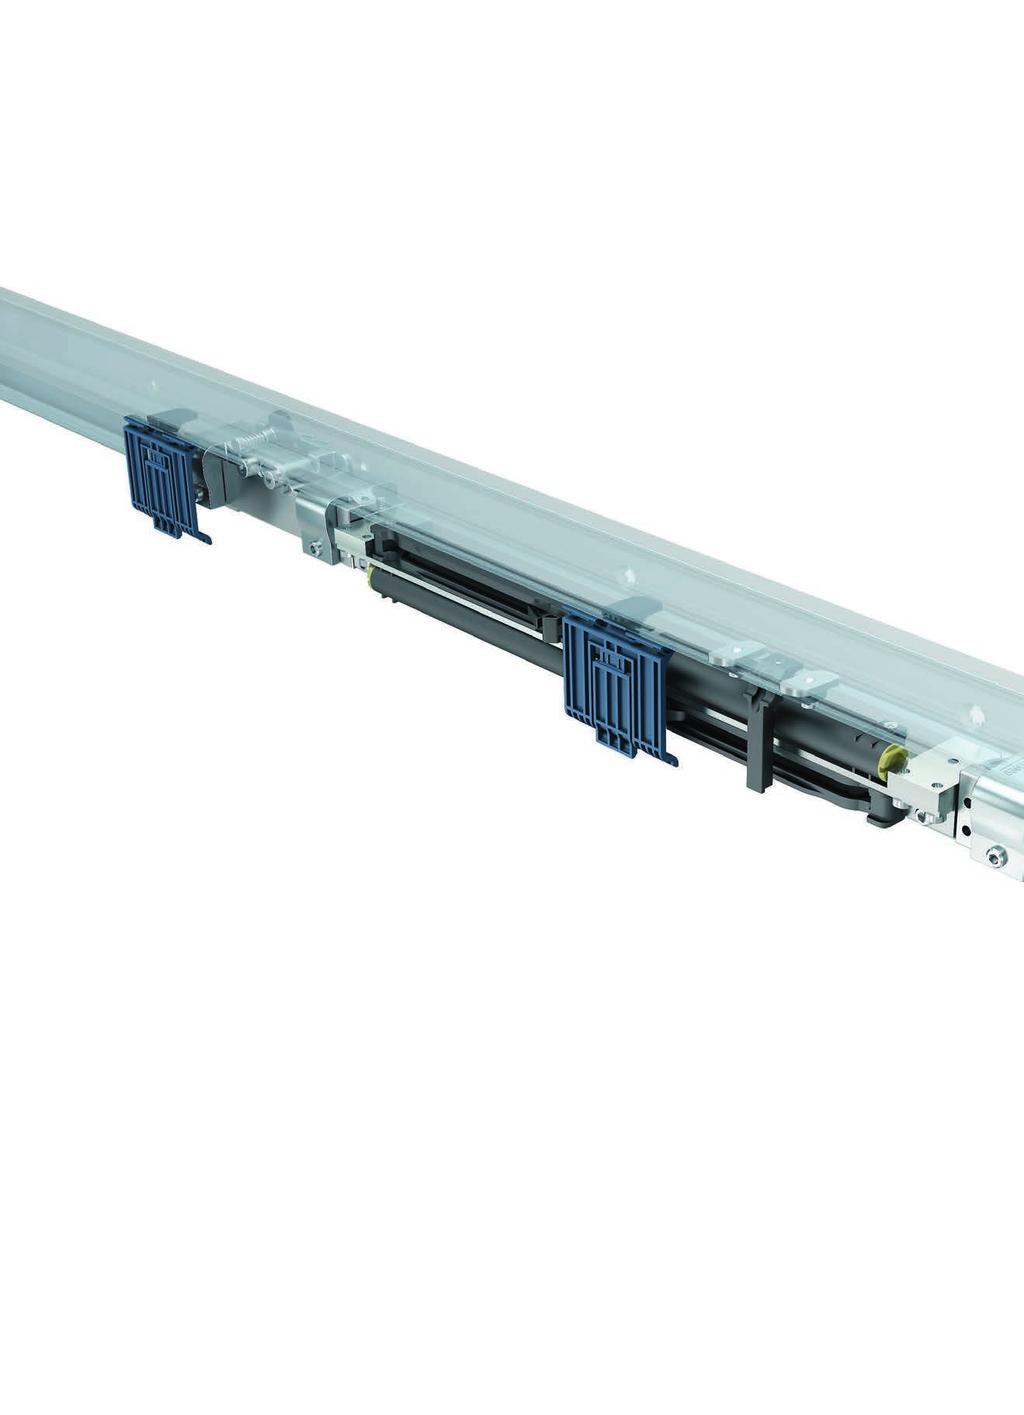 MUTO MANUAL SLIDING DOOR SYSTEM fast & EASY TO INSTALL MUTO our new standard for quick and hassle-free installation.